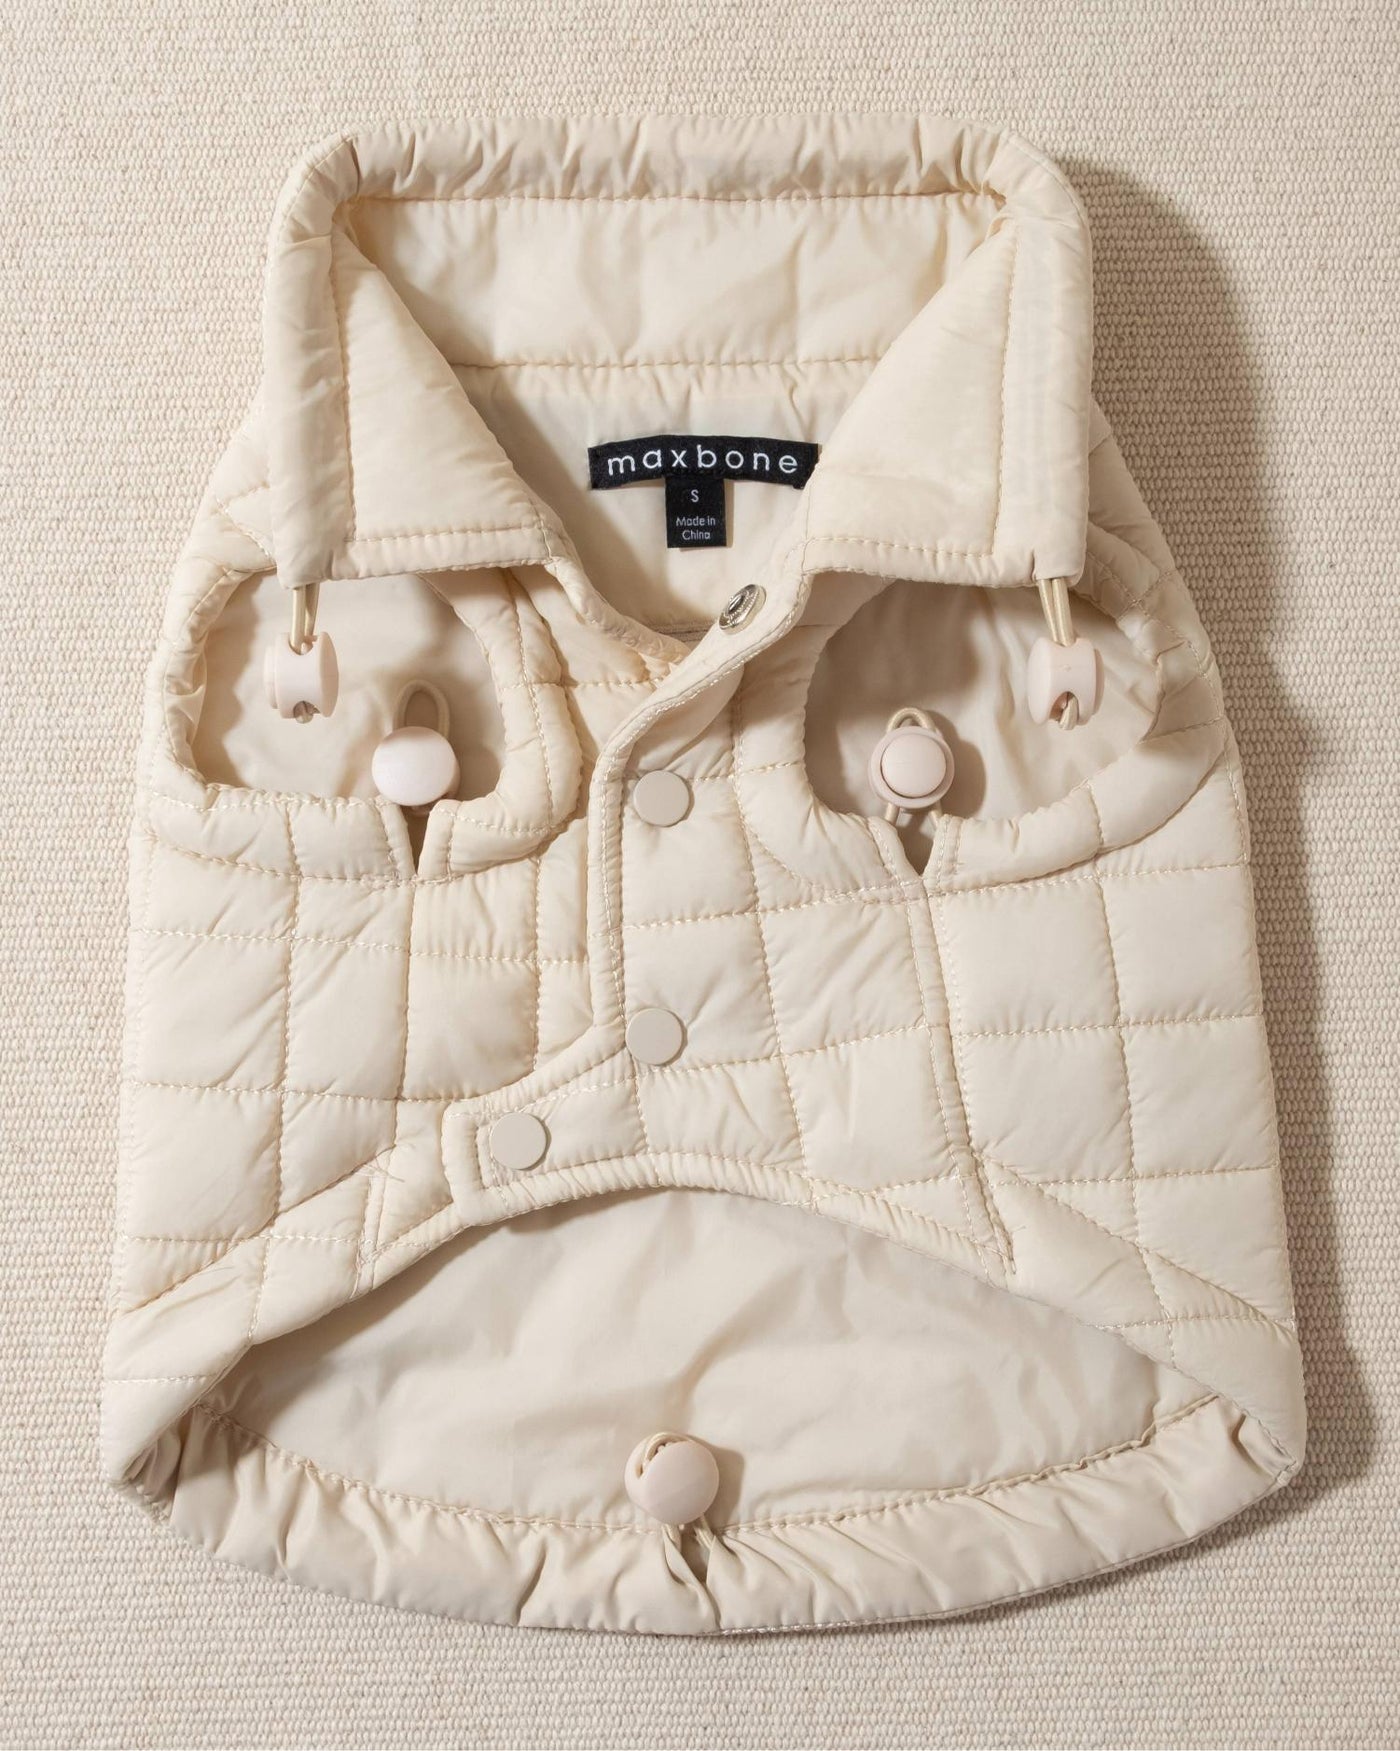 perfect on its own or layered with a cute sweater. This quilted, stylish jacket is fully adjustable, with coordinating sand cords on the hem, neck, and arm openings. Jacket can be worn over harness, with a small opening for leash attachment on the back. Asymmetrical buttons also make for more secure wear, for even the most portly of pups!